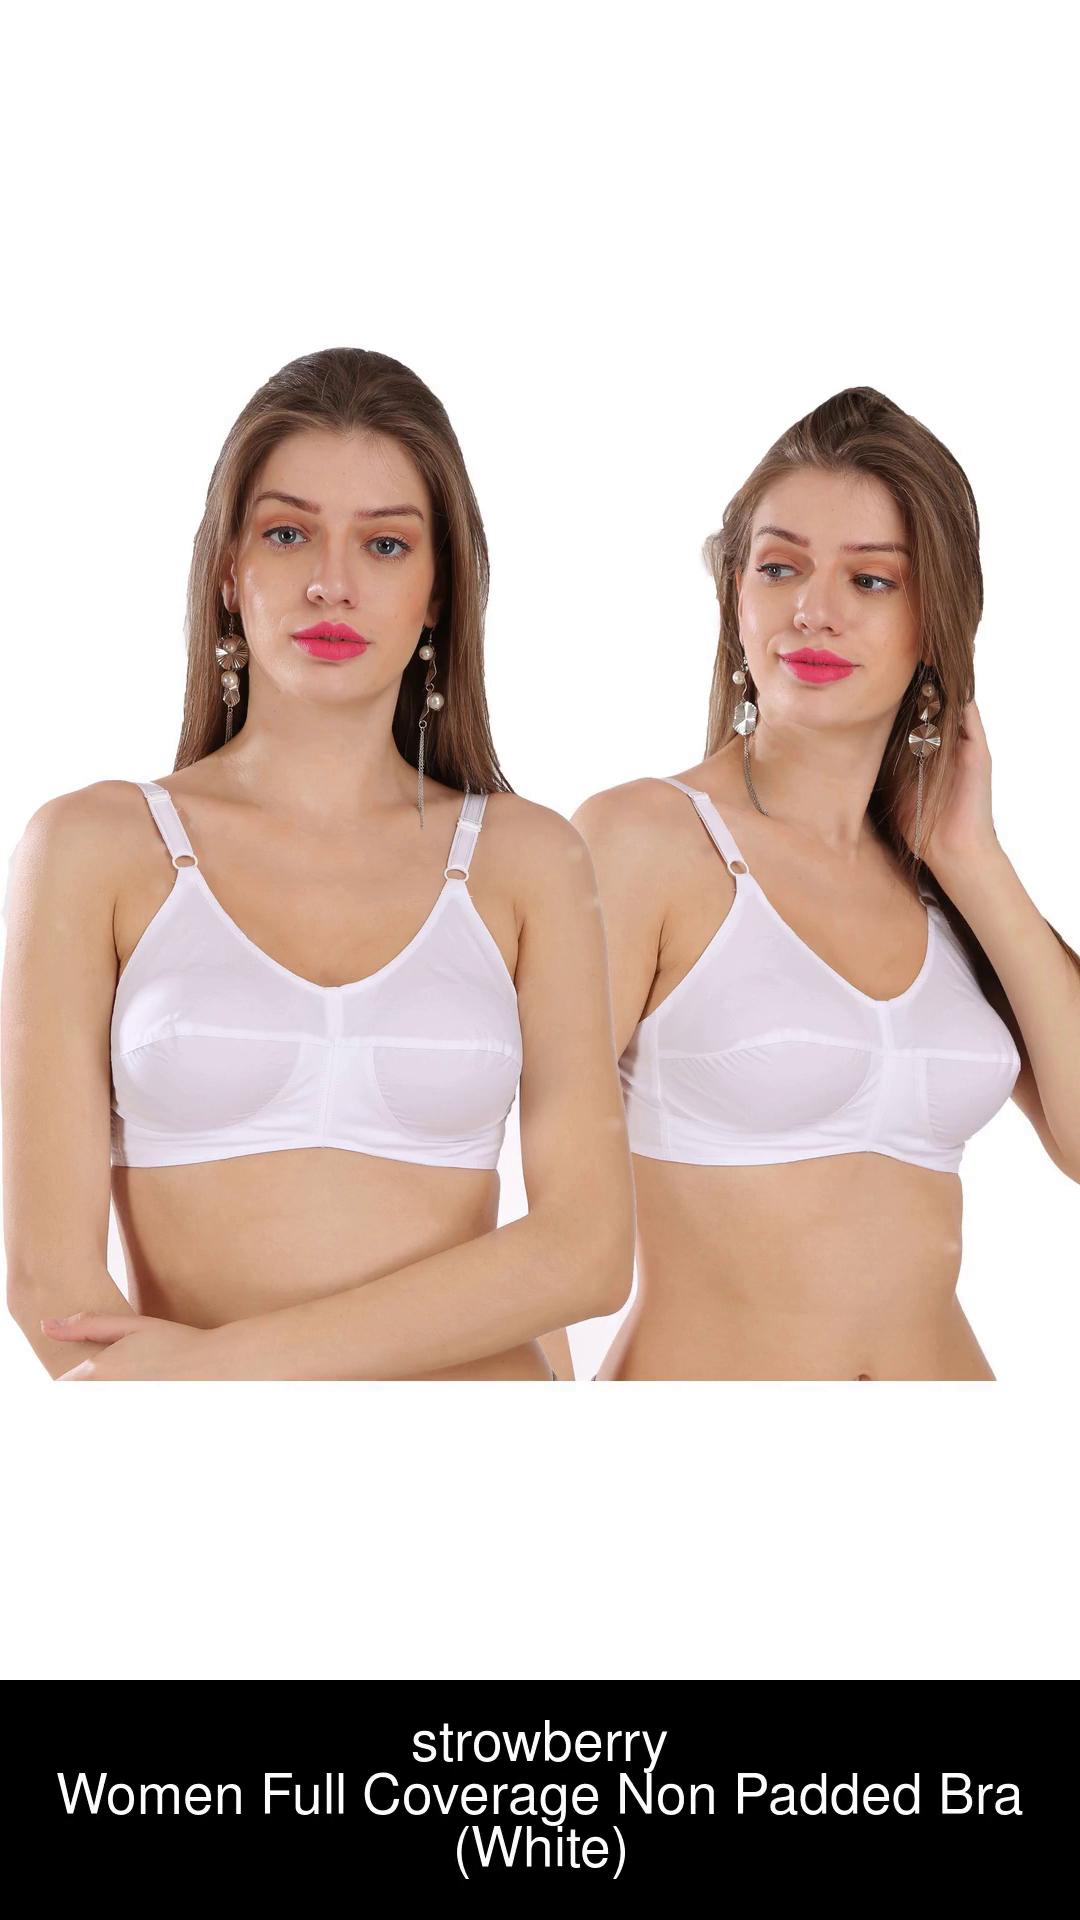 STROWBERRY PURE COTTON A,B,C,D,DD CUP BRA COMBO PACK Women Full Coverage  Non Padded Bra - Buy STROWBERRY PURE COTTON A,B,C,D,DD CUP BRA COMBO PACK Women  Full Coverage Non Padded Bra Online at